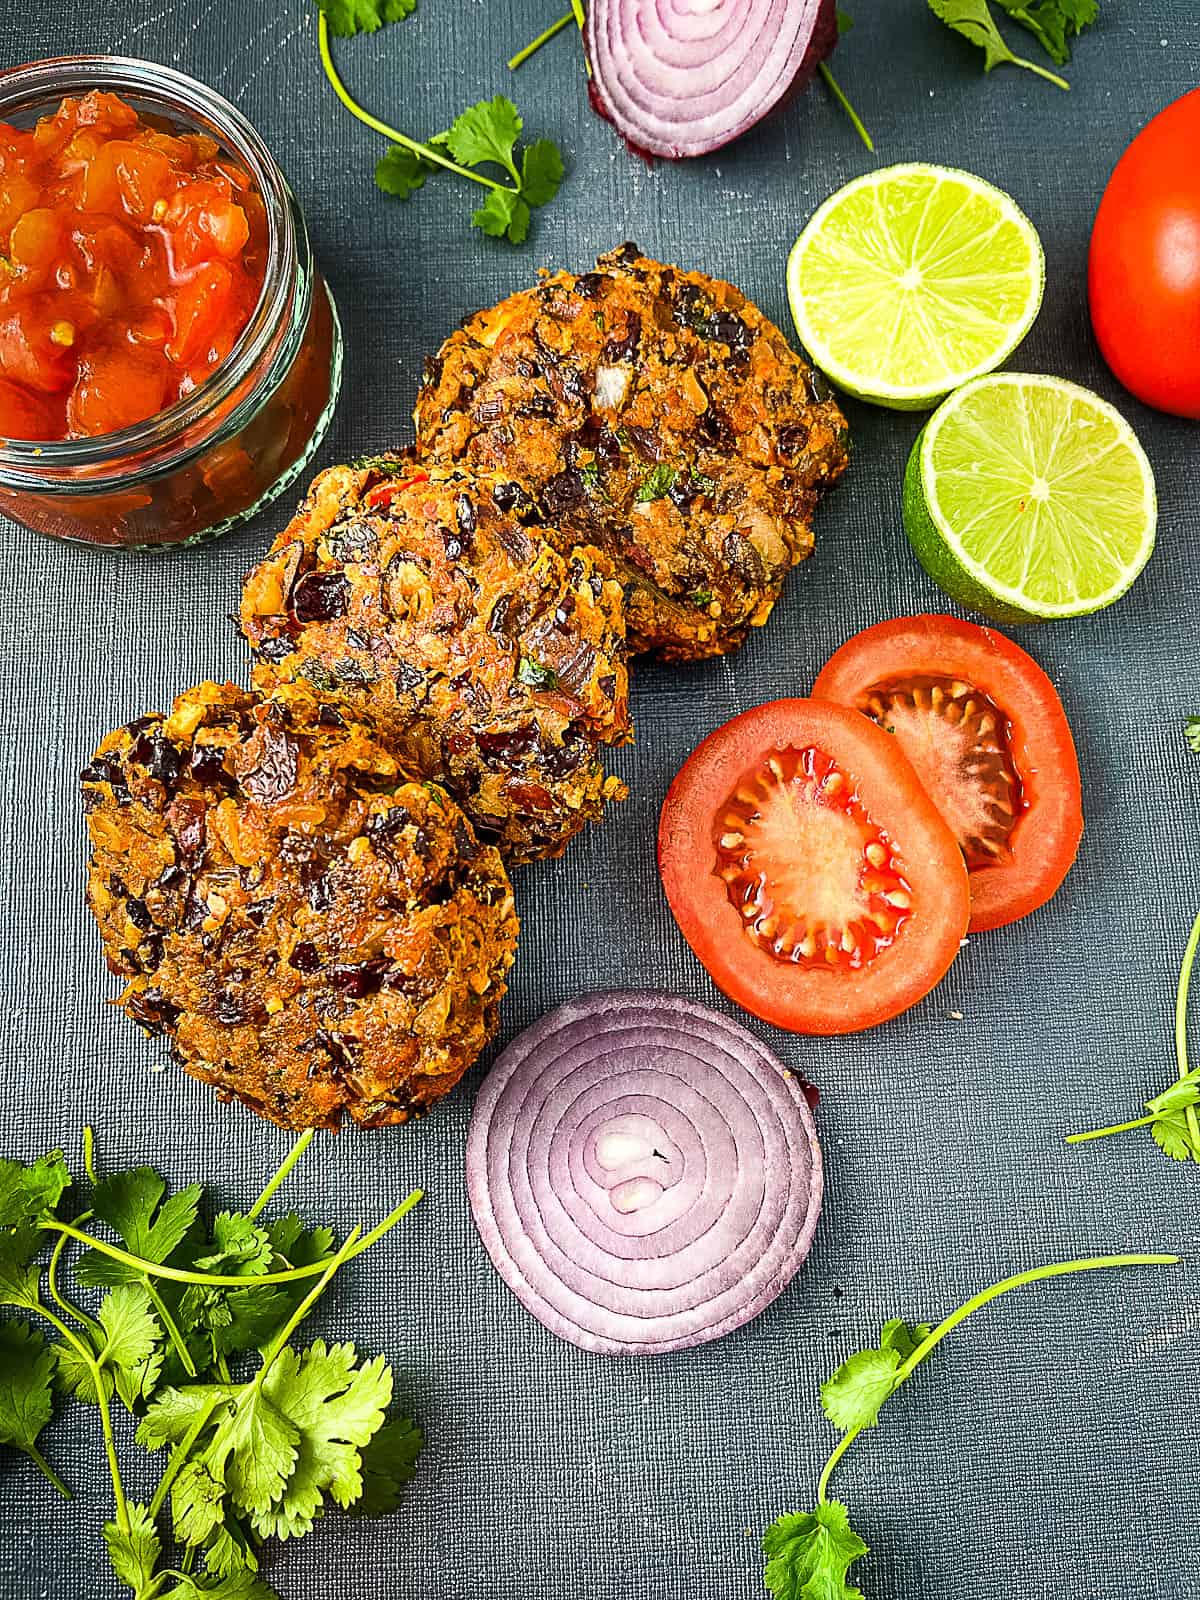 red kidney bean burger with sides of salsa, limes tomato and red onion